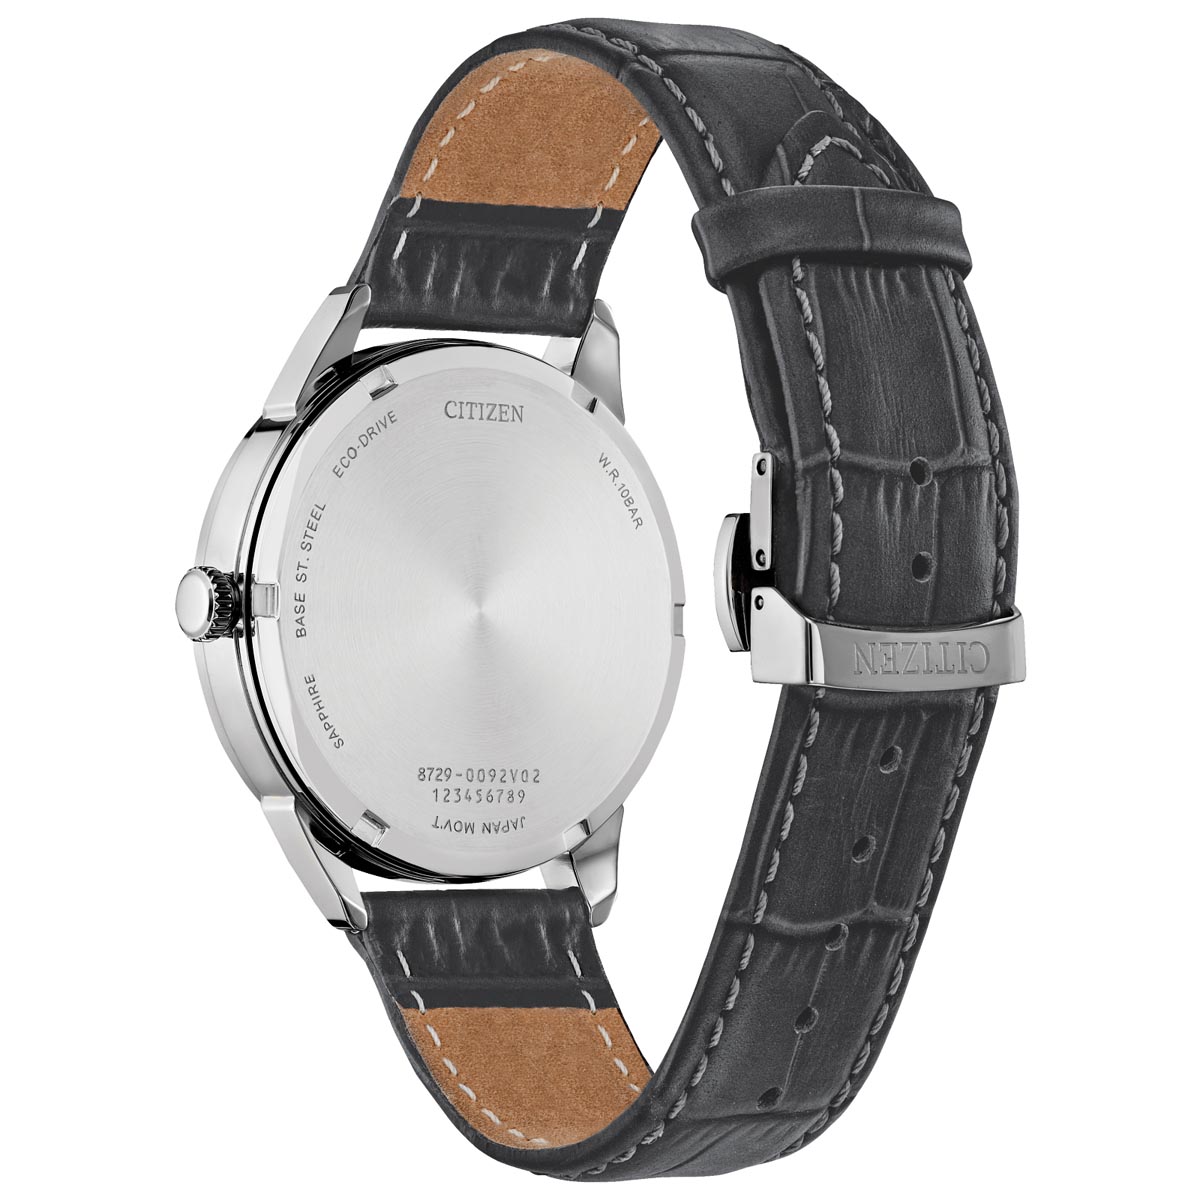 Citizen Classic Mens Watch with White Dial and Black Leather Strap (eco drive movement)